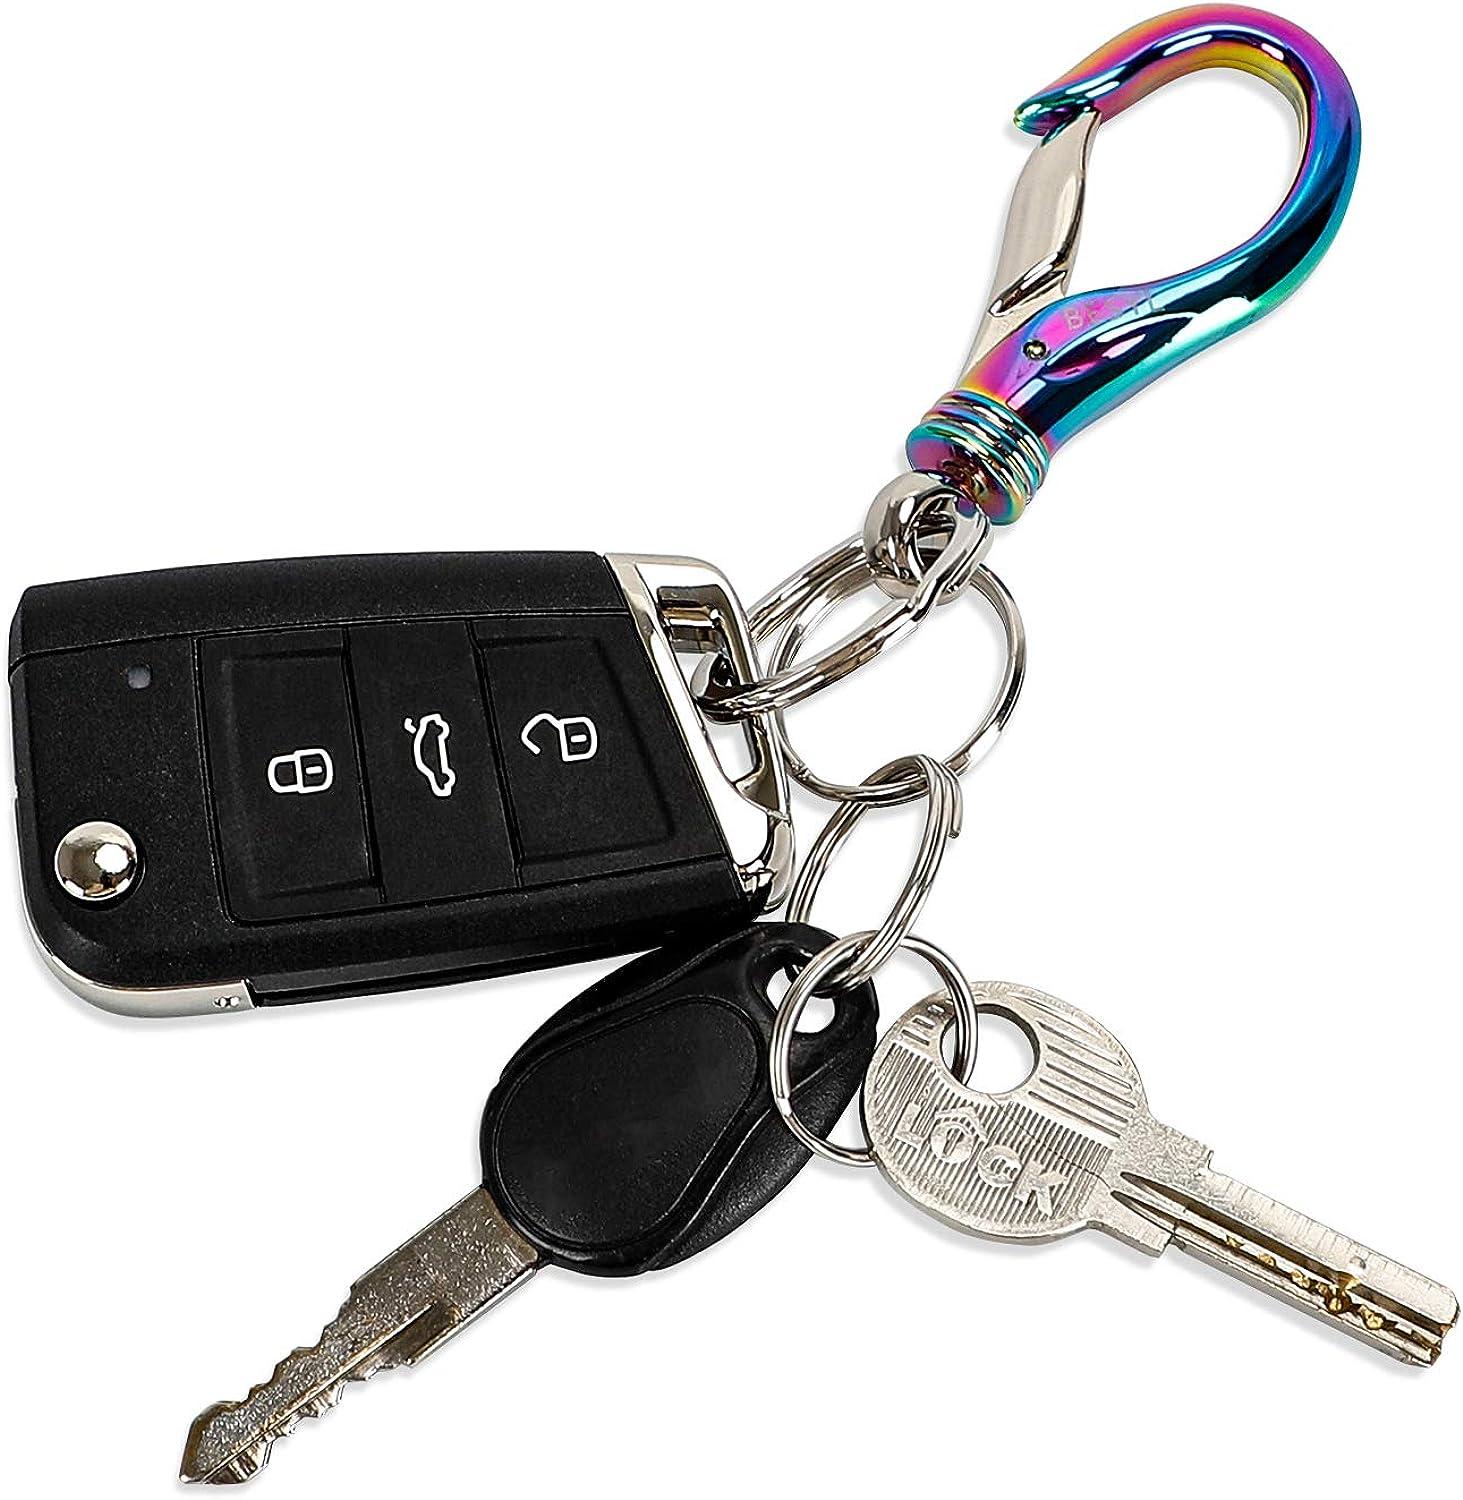  BESYL Black Commerce Keychain with 2 Key Rings, Office